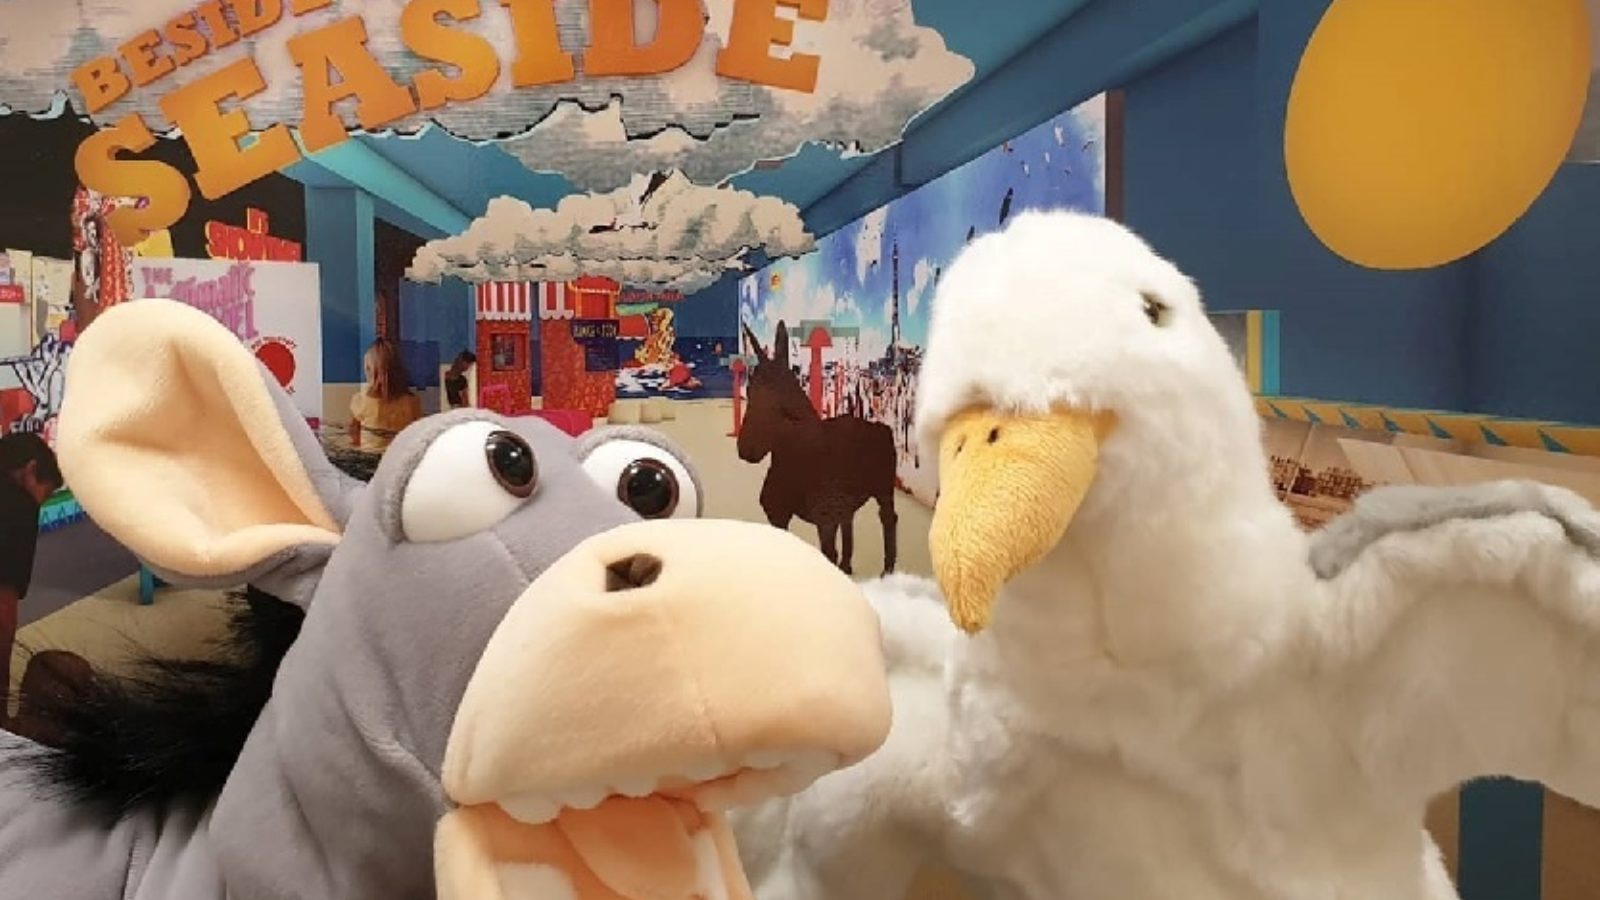 Donkey and Seagull puppets being silly